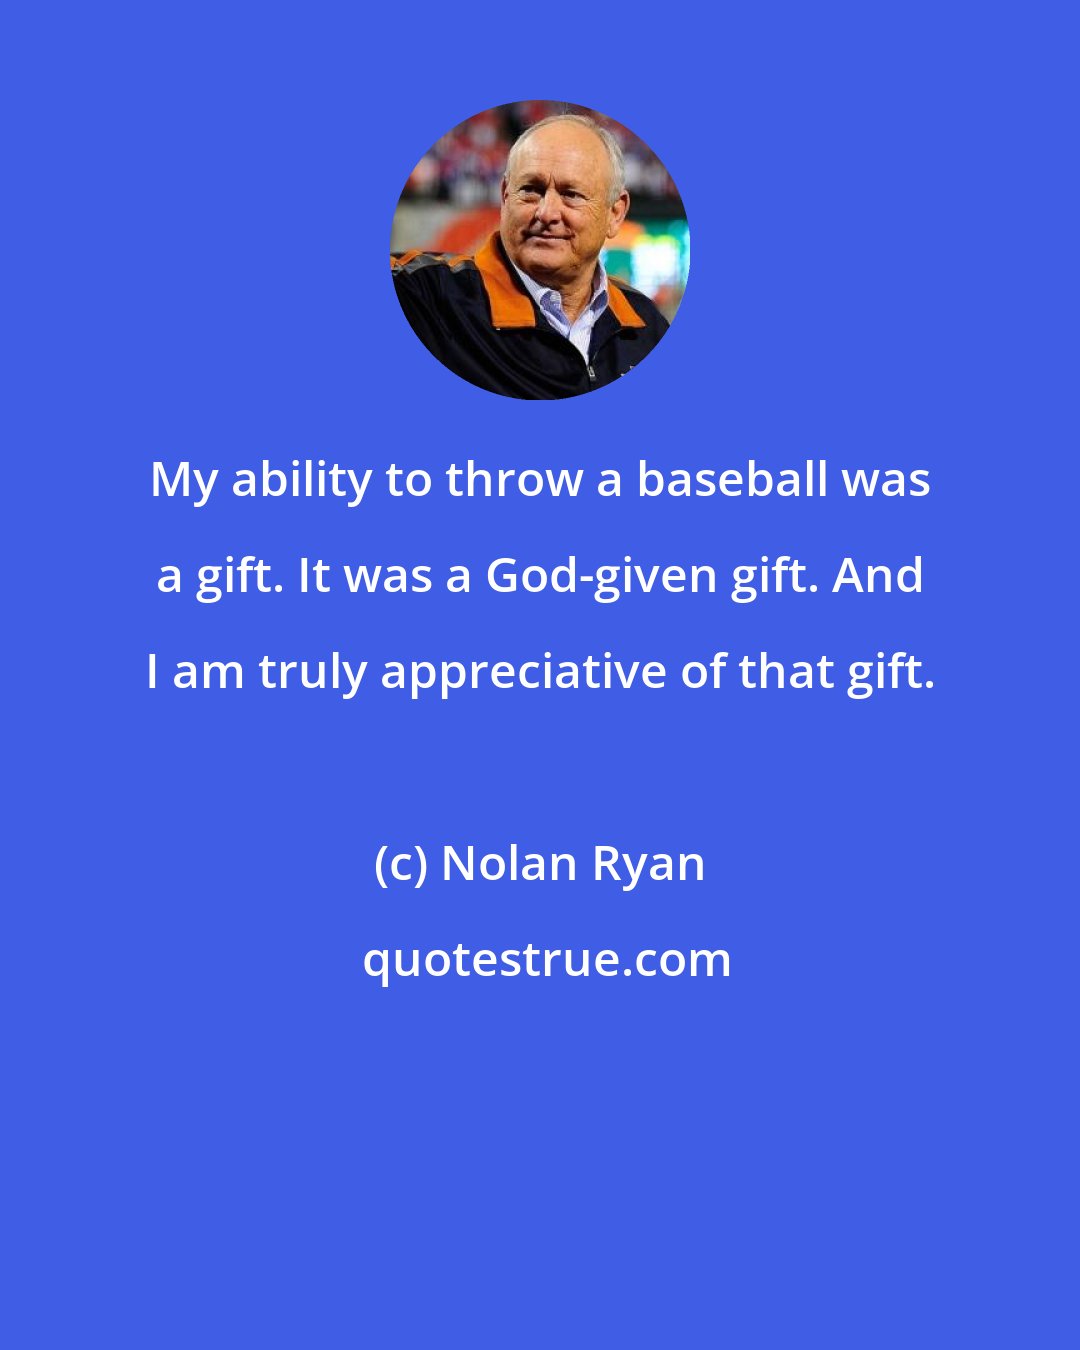 Nolan Ryan: My ability to throw a baseball was a gift. It was a God-given gift. And I am truly appreciative of that gift.